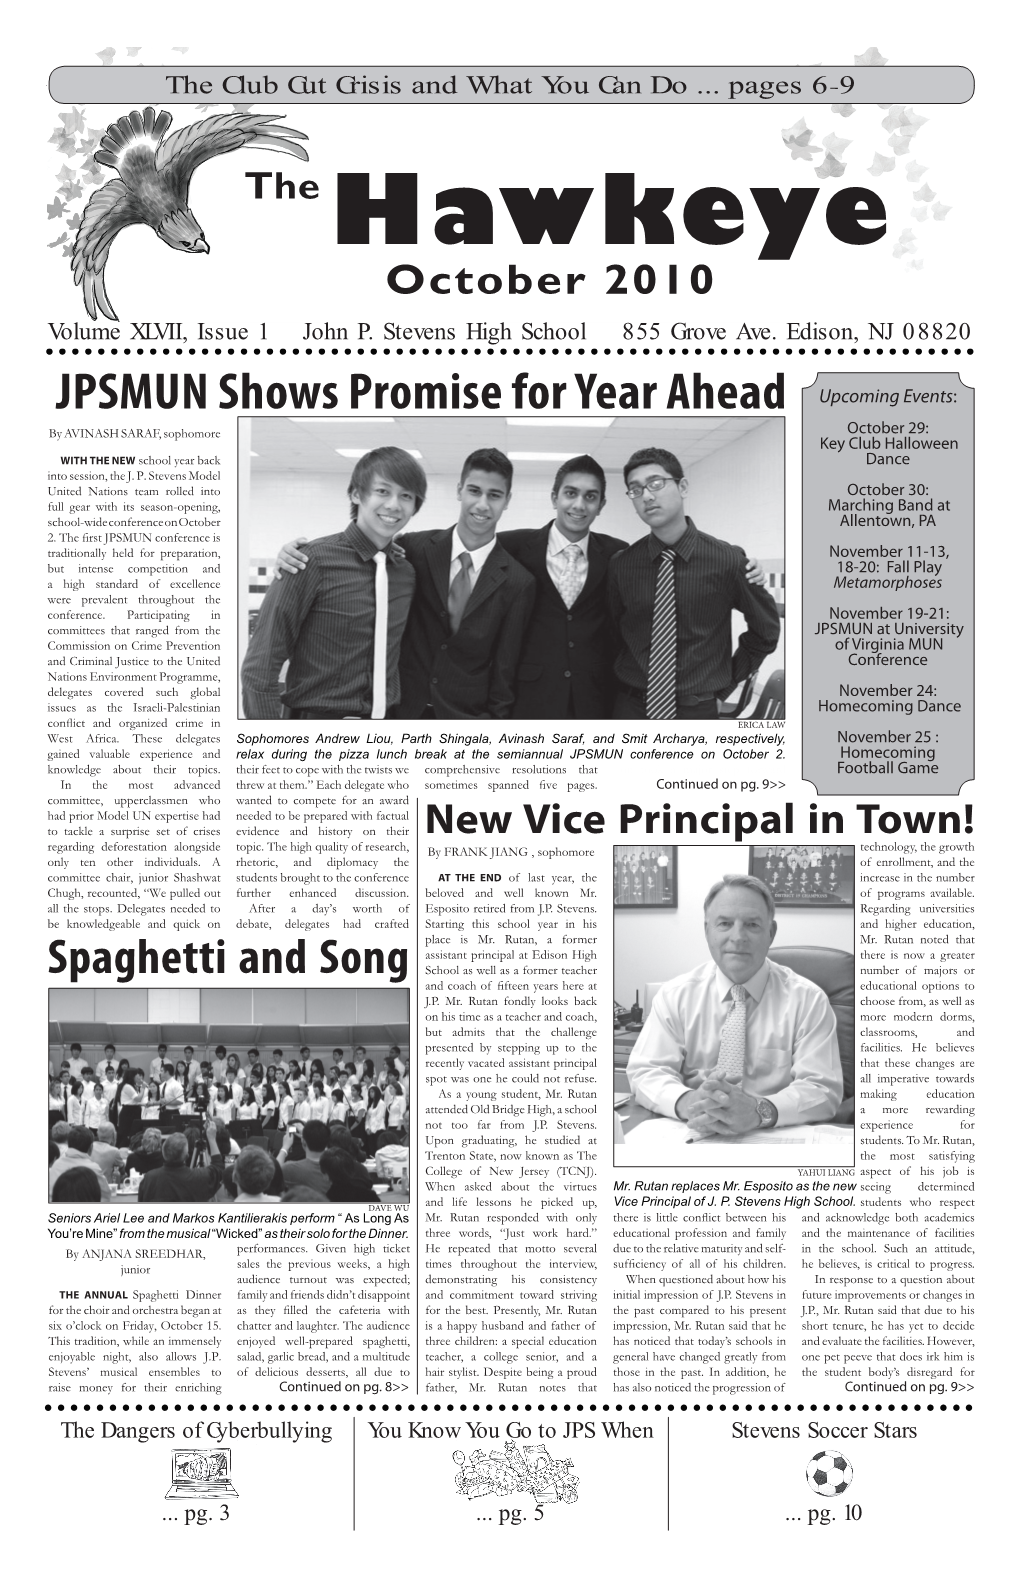 JPSMUN Shows Promise for Year Ahead Upcoming Events